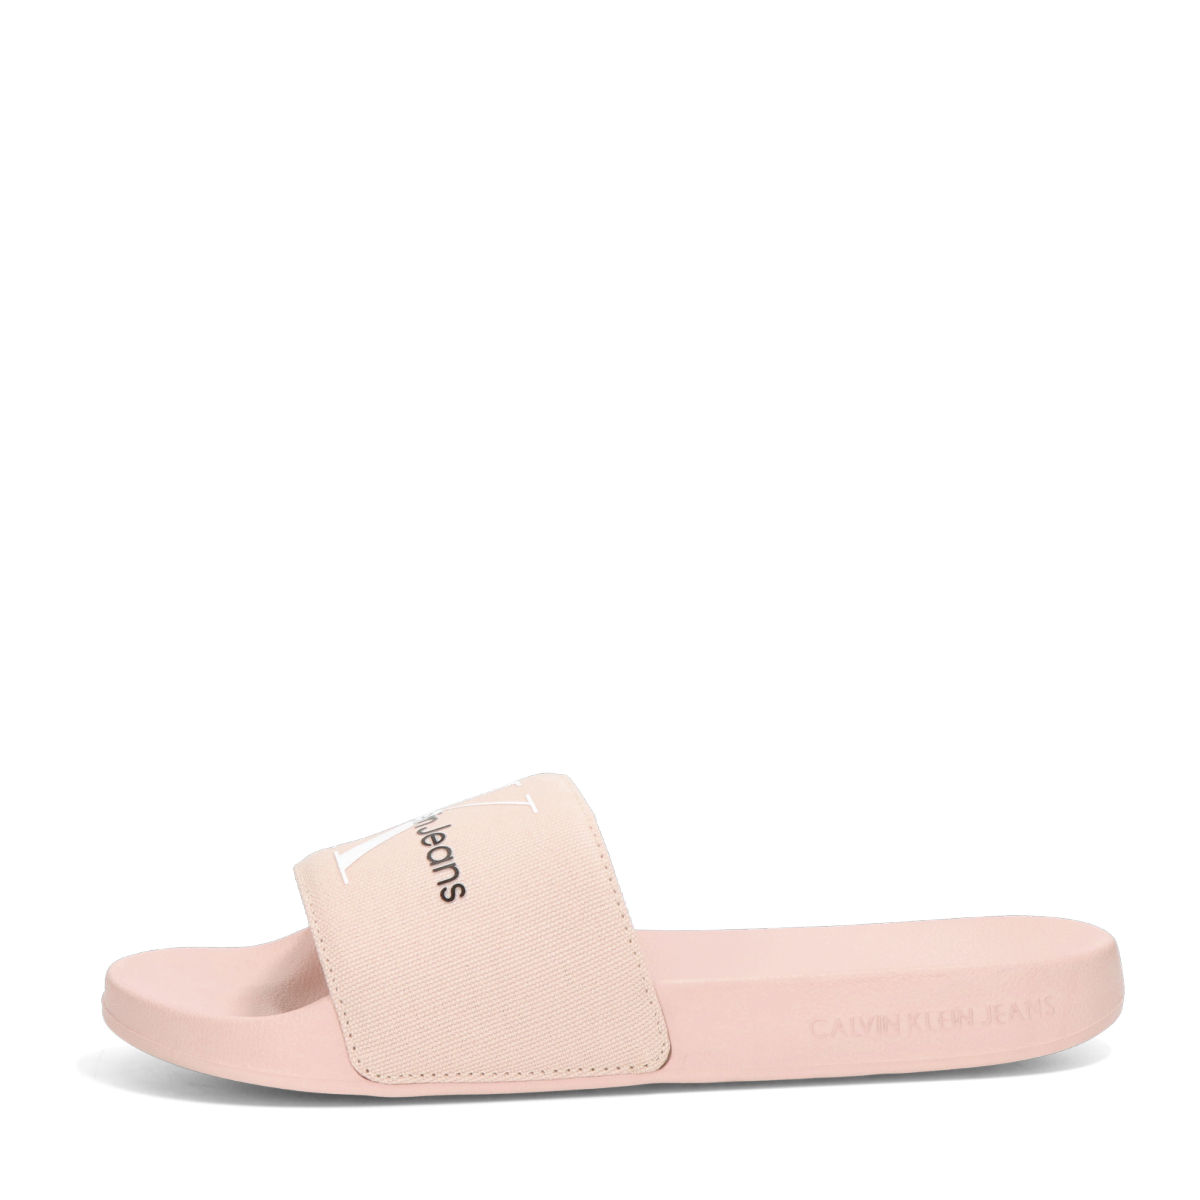 Calvin women's stylish slippers pink | Robel.shoes